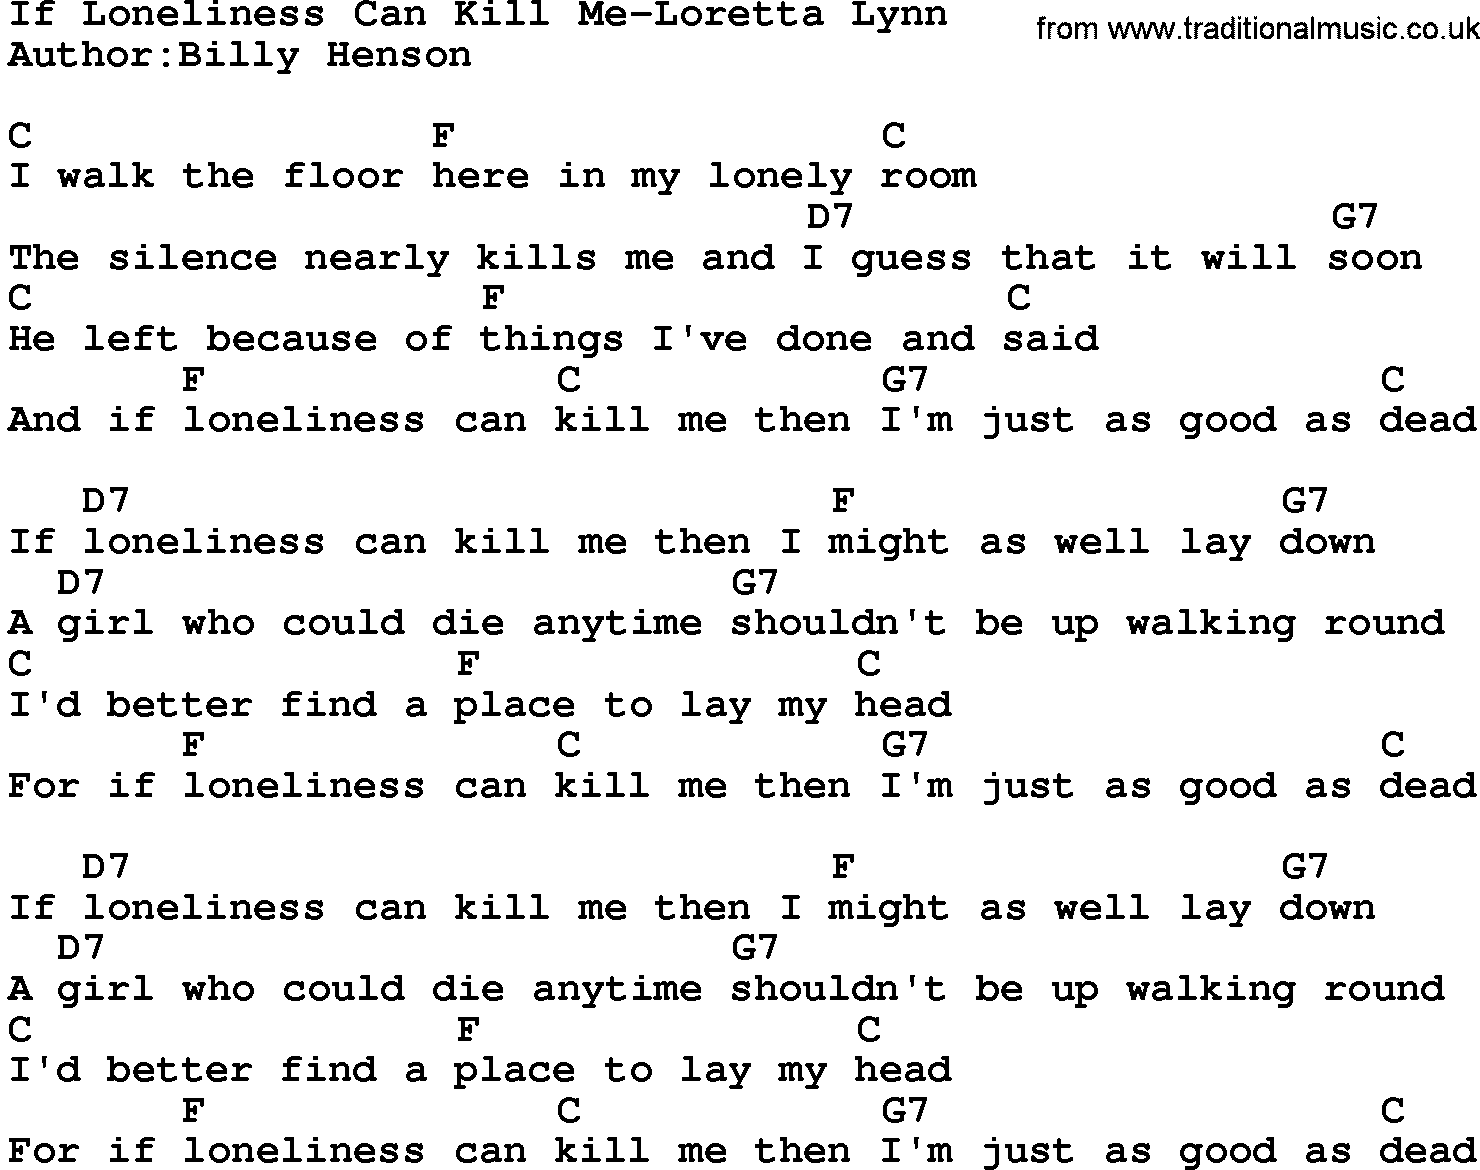 Country music song: If Loneliness Can Kill Me-Loretta Lynn lyrics and chords